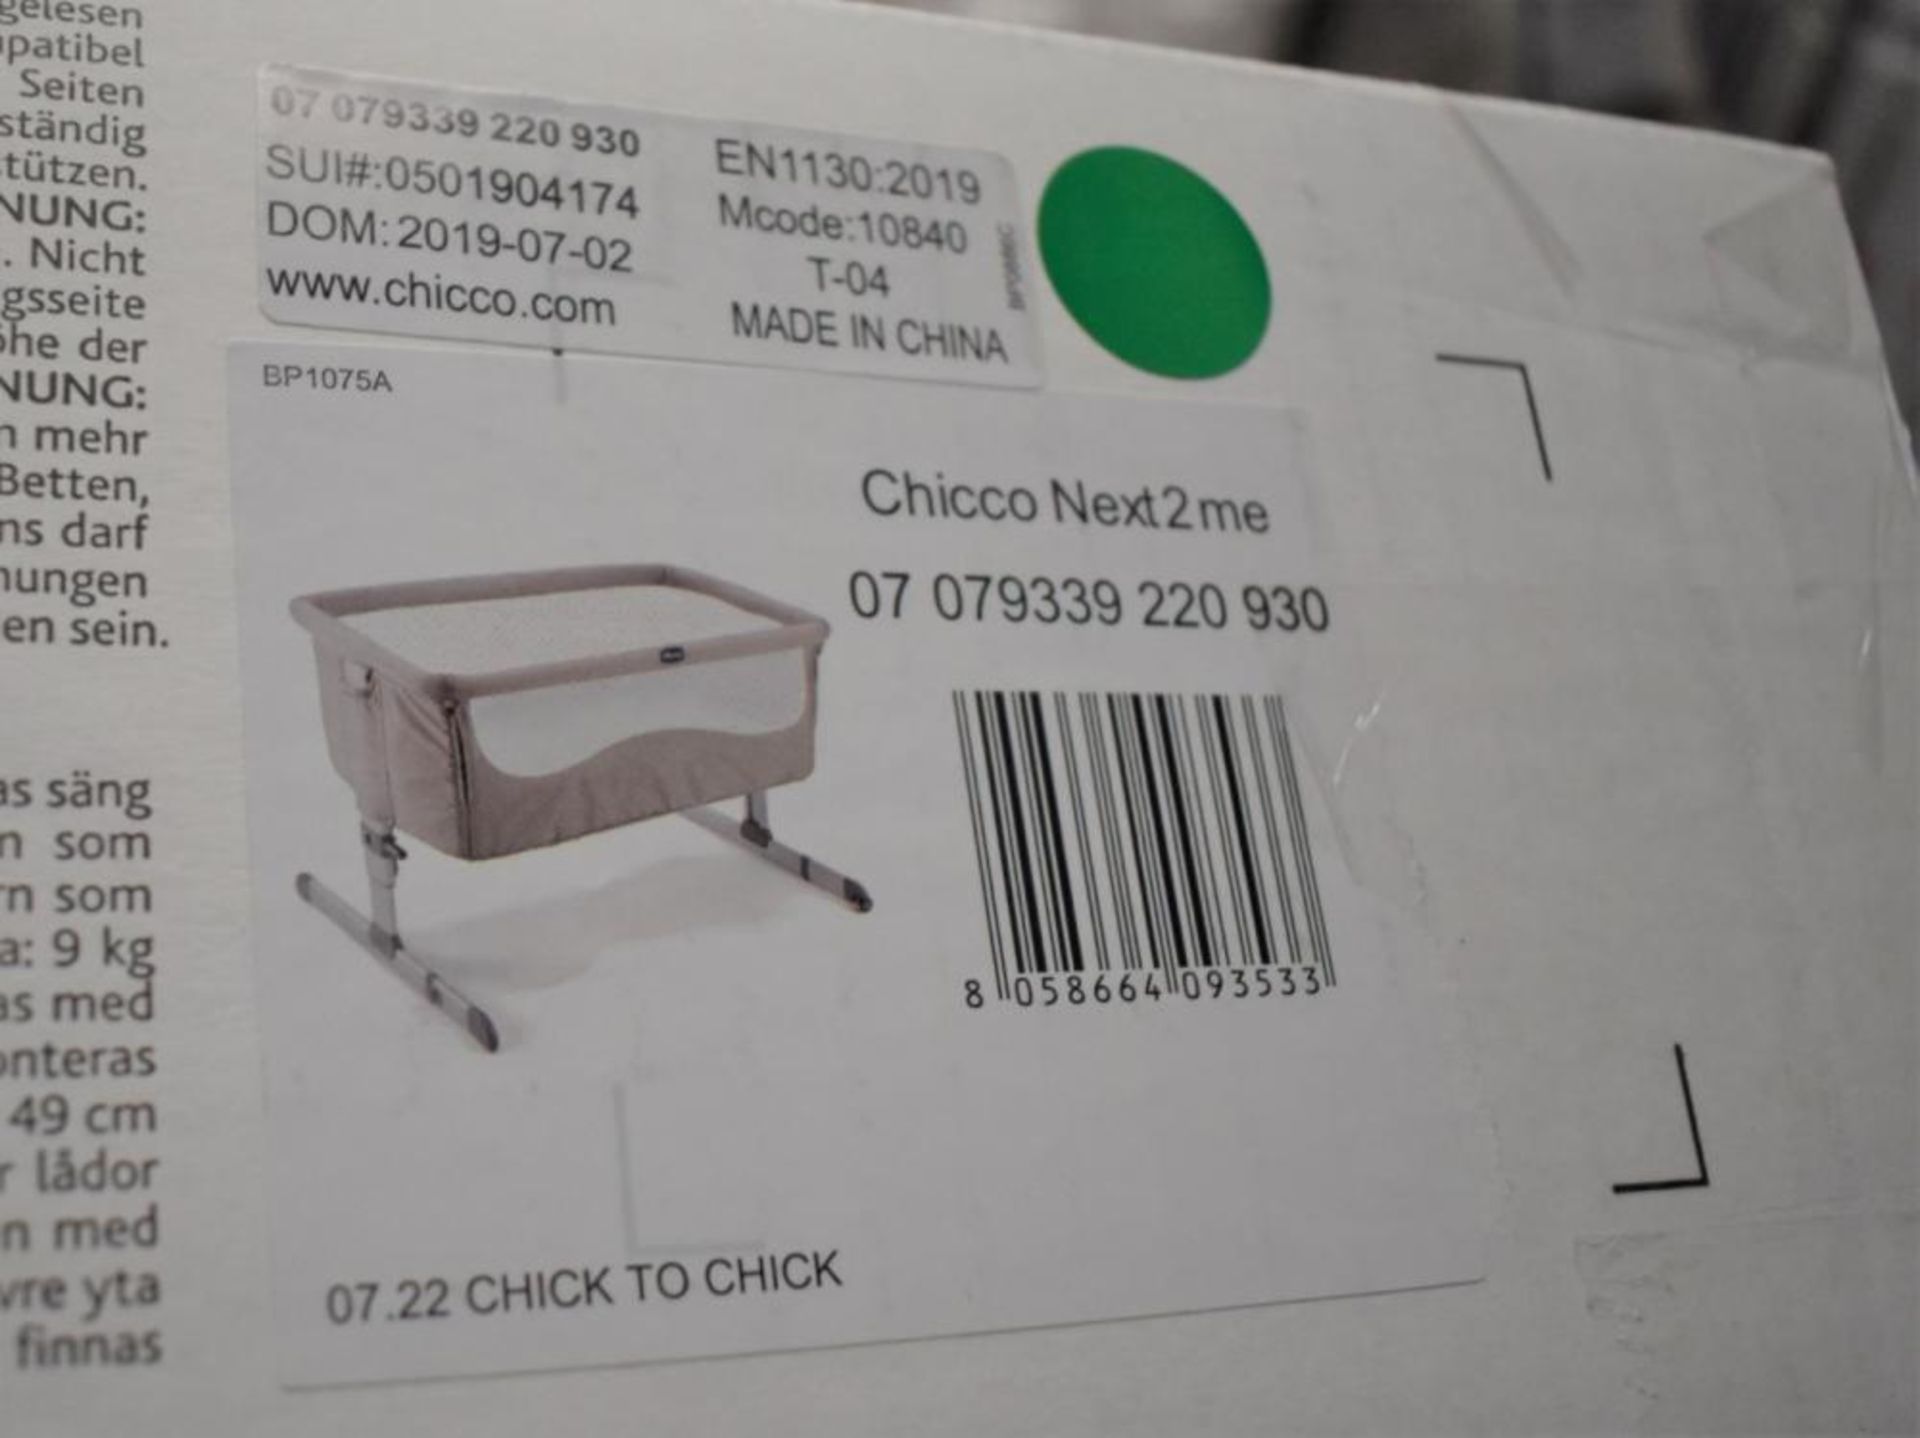 1 x Chicco Next2me Chick to Chick Bedside Baby Crib - Brand New 2019 Sealed Stock - Includes Mattres - Image 9 of 10